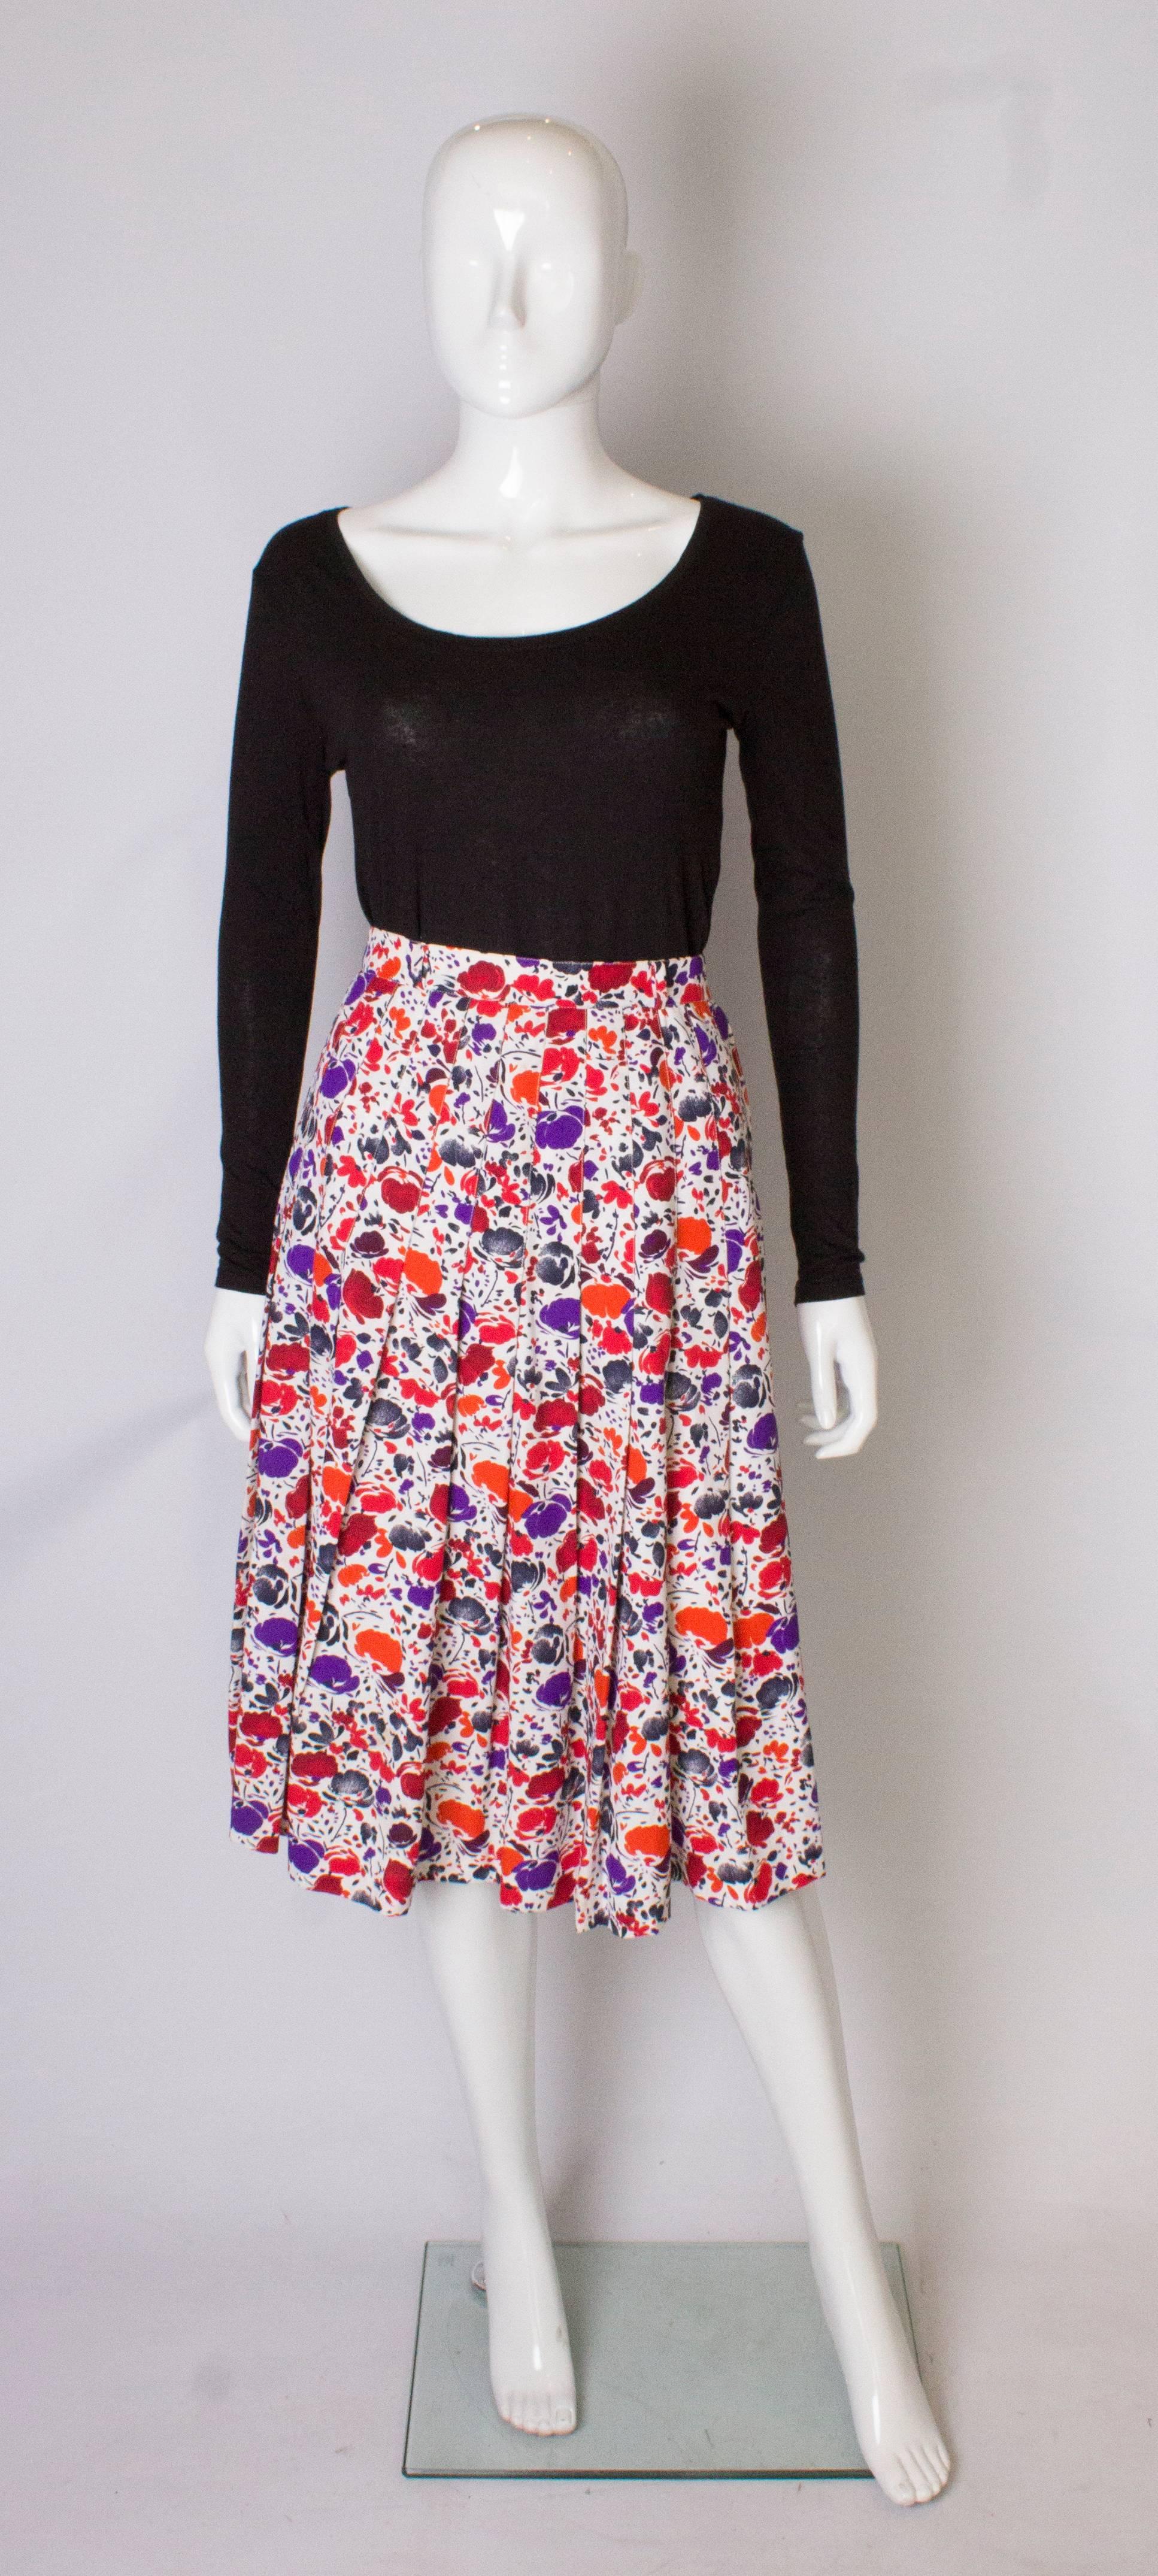 A chic vintage pleated skirt by Jean Louis Scherer Boutique. The skirt is number 087951, and has a white background with a red, orange and purple print. The skirt has sewn in pleats to the hip and so creates a smooth line. The skirt has a zip